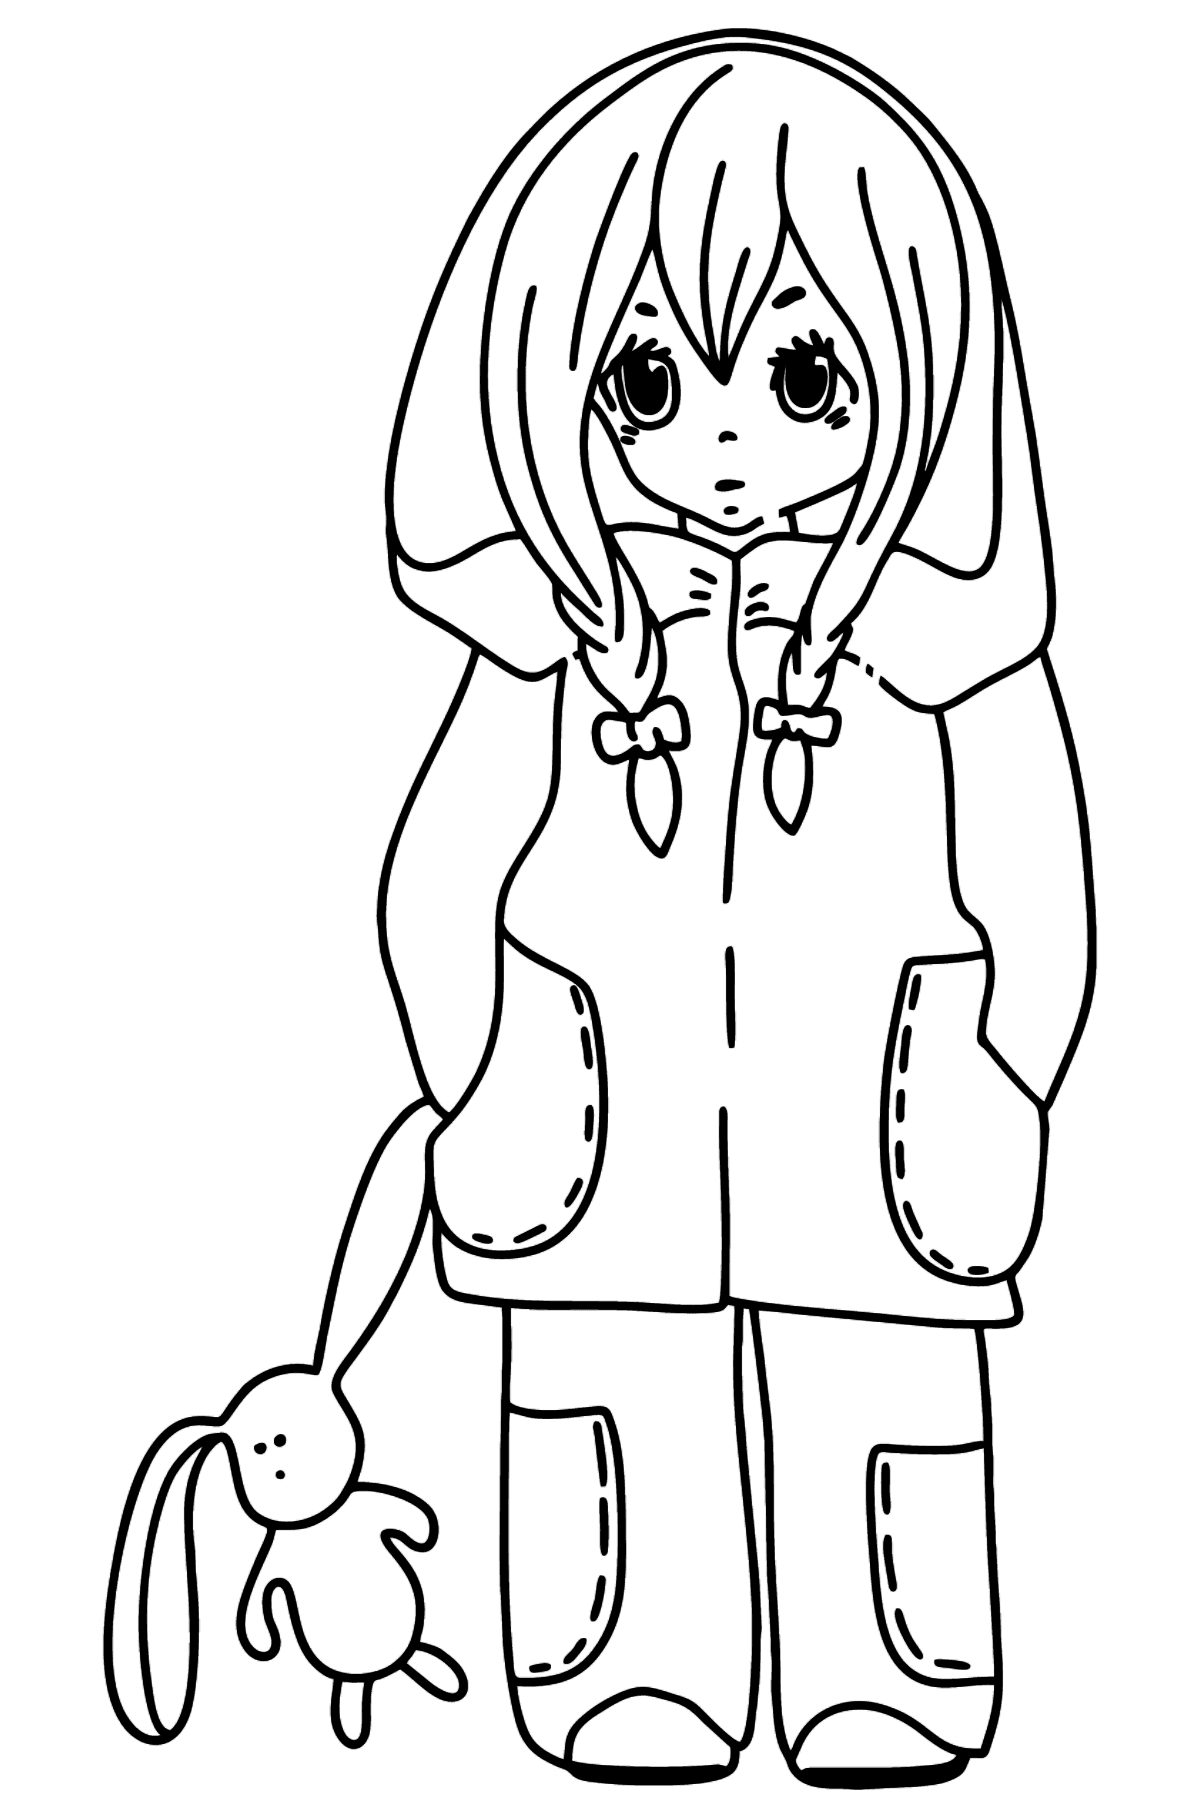 Anime girl with pigtails coloring page - Coloring Pages for Kids